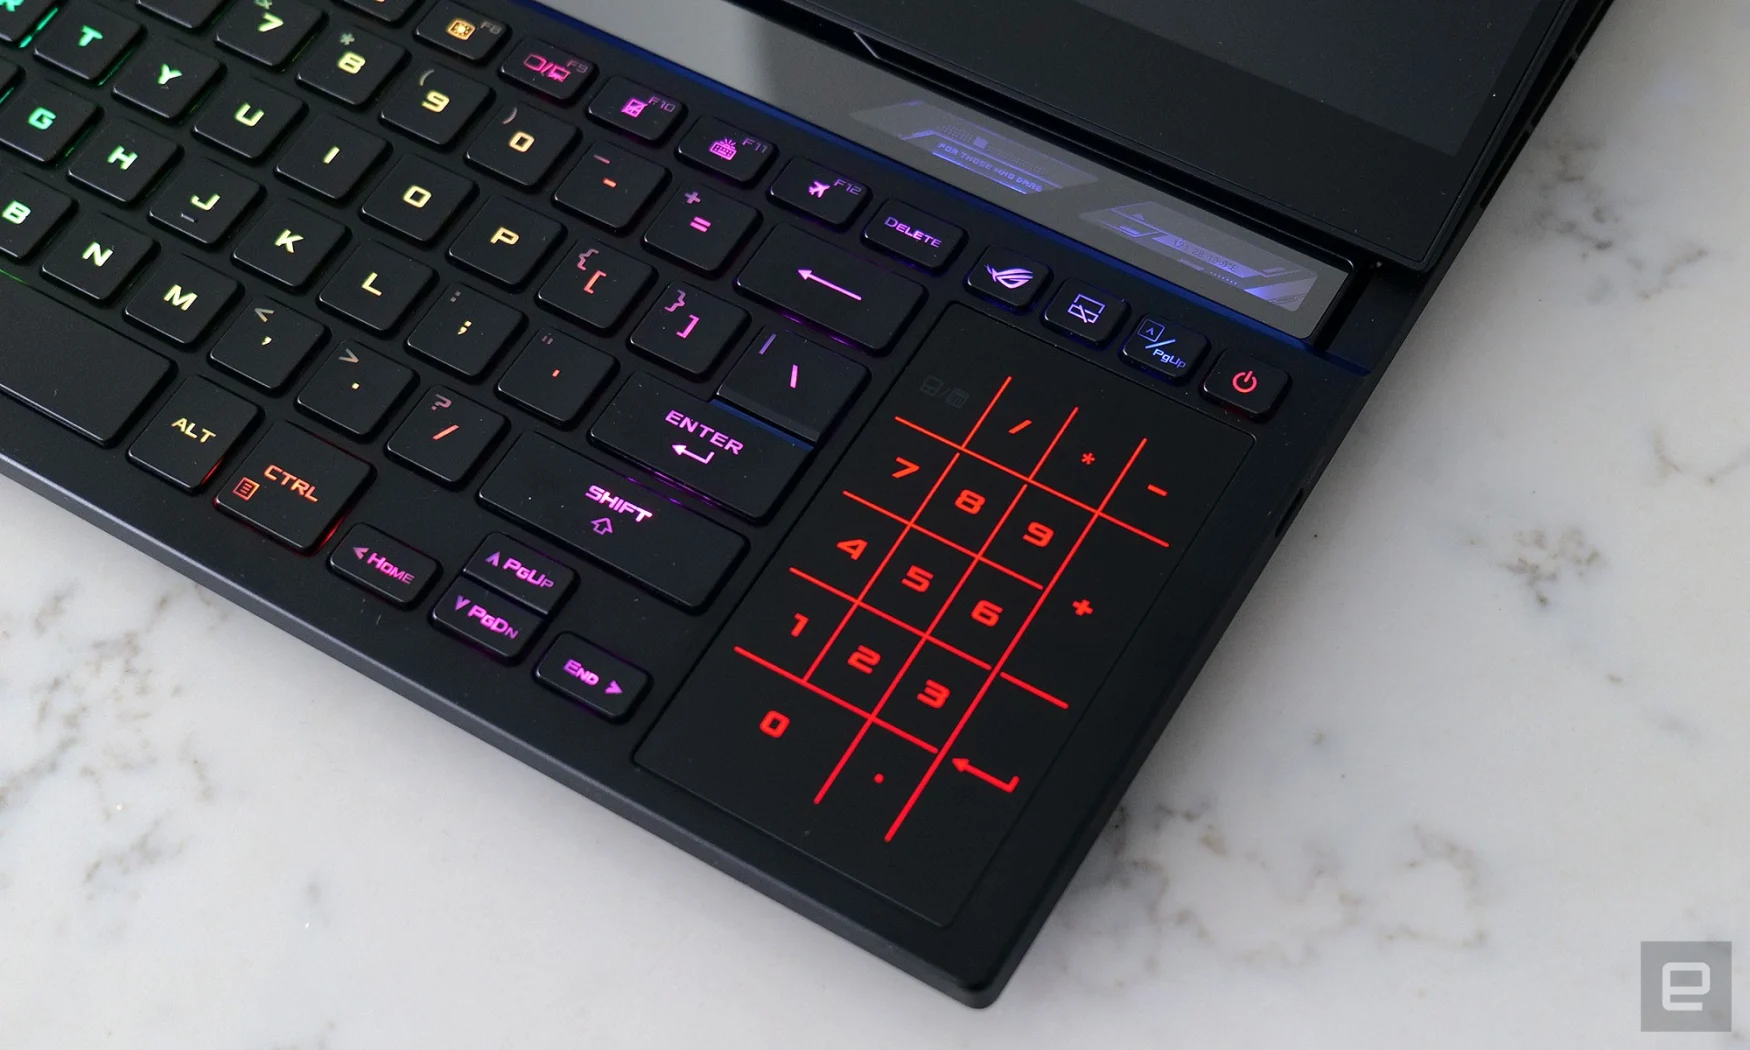 Because of its design, the Asus ROG Zephyrus Duo 16's touchpad is rather cramped. But ASUS tries to make up for that with a feature that transforms the touchpad into a number pad with a single touch. 